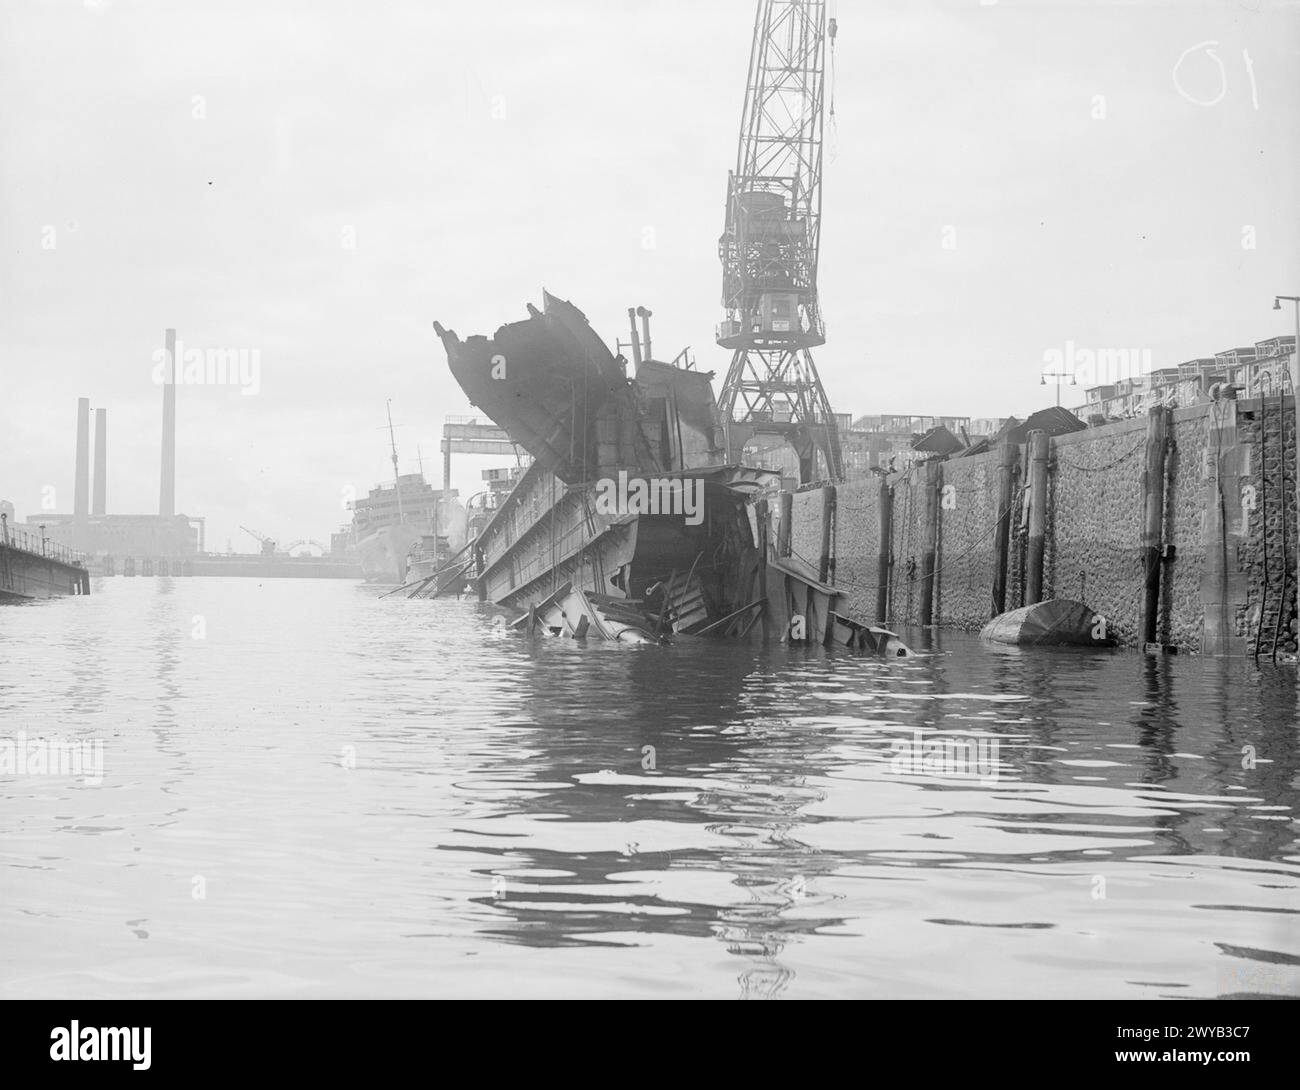 WRECKAGE IN THE BOMB-SCARRED HAMBURG DOCKS. 8 JULY 1945, WRECKED AND BURNT OUT GERMAN SHIPPING IN THE BOMB-BATTERED DOCKS AT HAMBURG. - The ROBERT LEY, 'strength through joy' ship, viewed through a bombed, torn and sunk floating dock. , Stock Photo